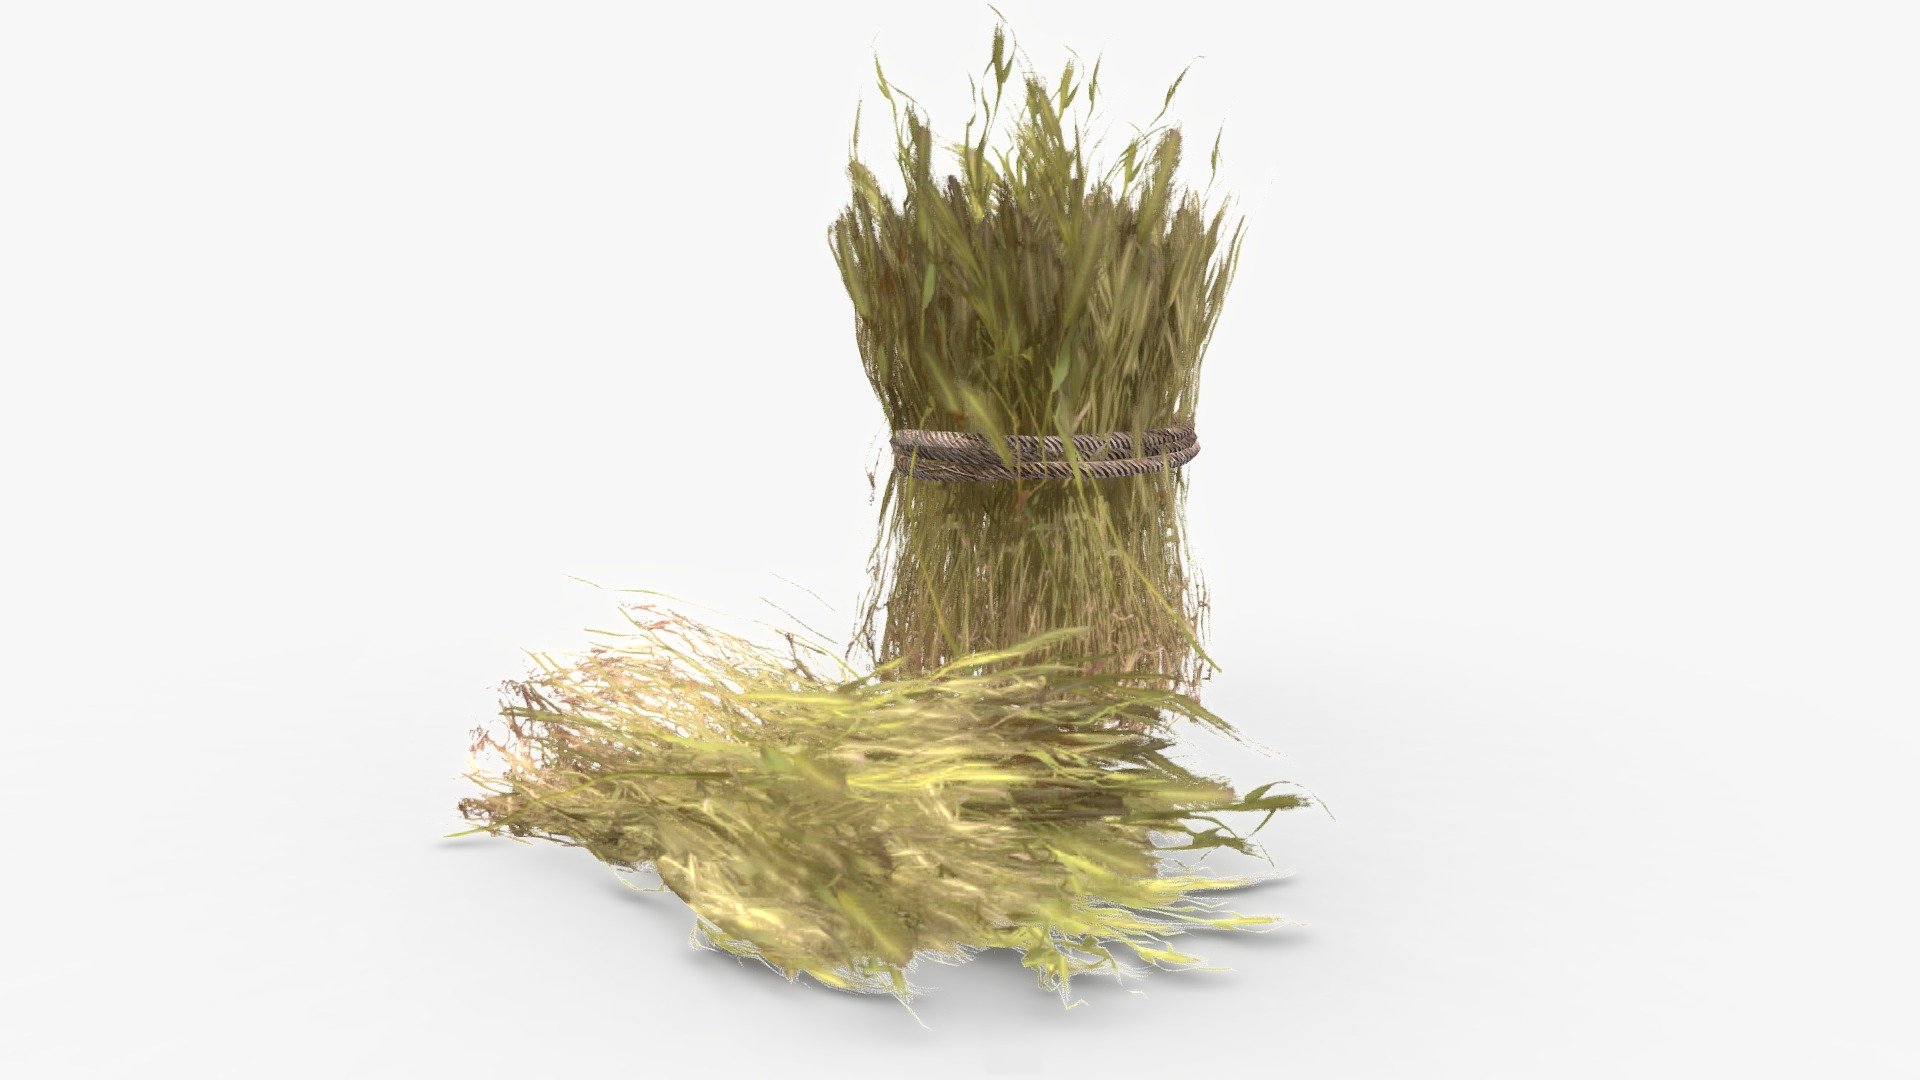 Check out my website for more products and better deals! &gt;&gt; SM5 by Heledahn &lt;&lt;


This is a digital 3d model of an pile of harvested barley and a roll. The roll is tied with a rough handmade rope, and it has a shape key to control the amount of messiness.

(4K TEXTURES, TIF TEXTURES, AND SHAPE KEYS ONLY FOR SALE IN MY WEBSITE 🔼)

This model can be used for any Medieval/Fantasy themed render project, used either as a background prop, or as a closeup prop due to its high detail and visual quality.

This product will achieve realistic results in your rendering projects and animations, being greatly suited for close-ups due to their high quality topology and PBR shading 3d model